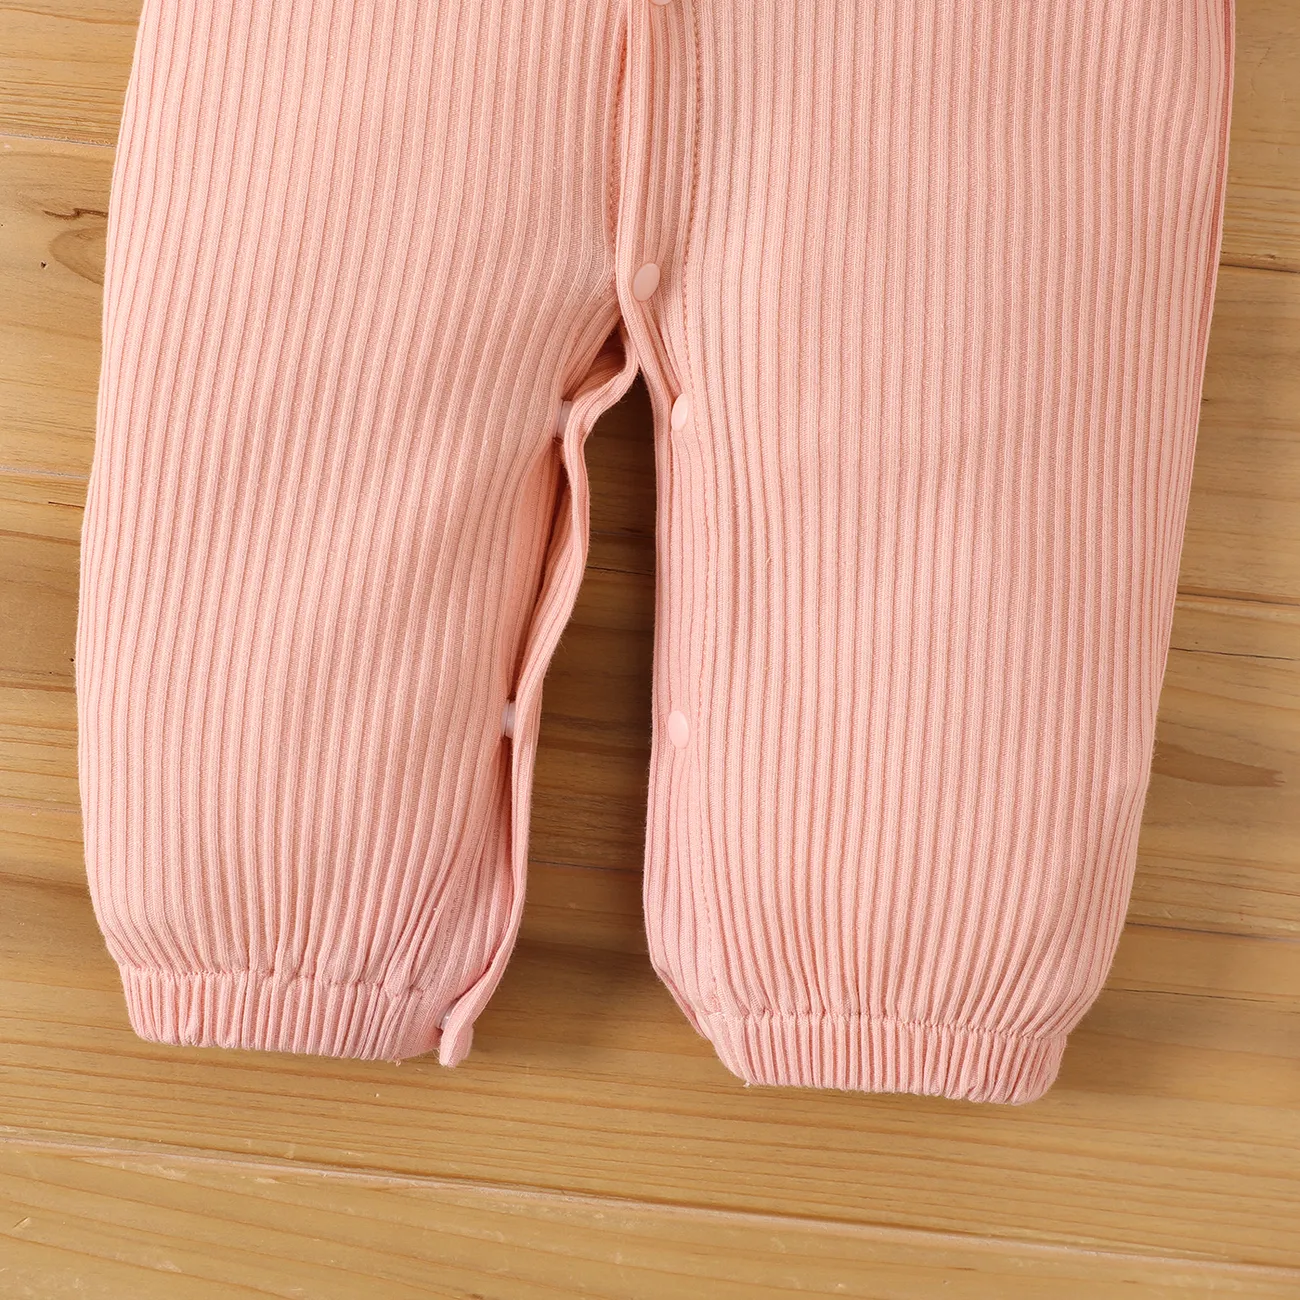 Baby Boy/Girl 95% Cotton Solid Ribbed Long-sleeve 2-in-1 Jumpsuit/Dress Pink big image 1